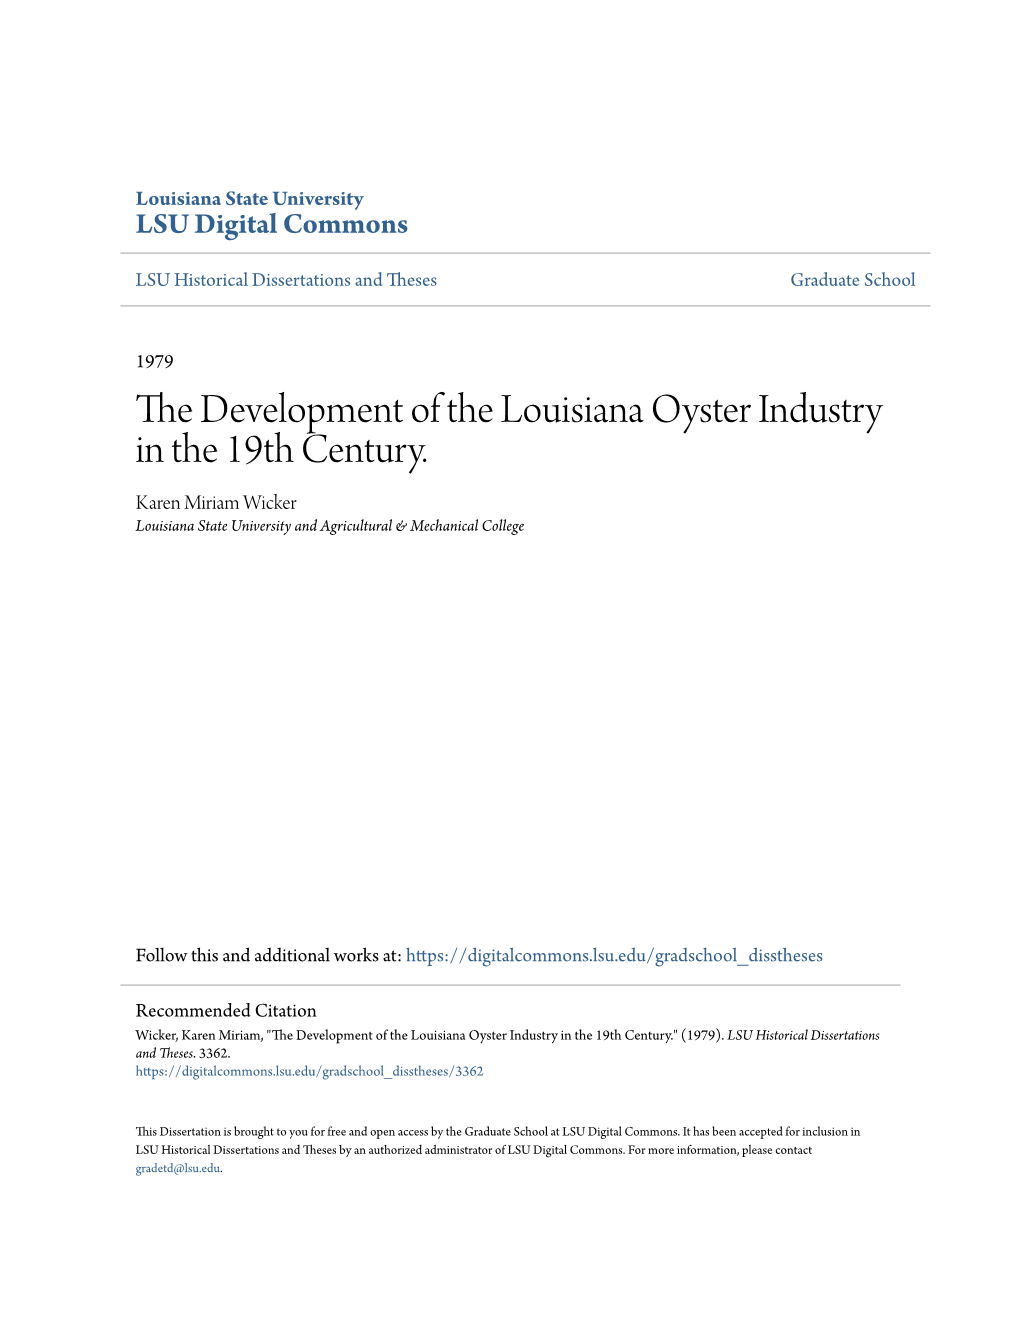 The Development of the Louisiana Oyster Industry in the 19Th Century